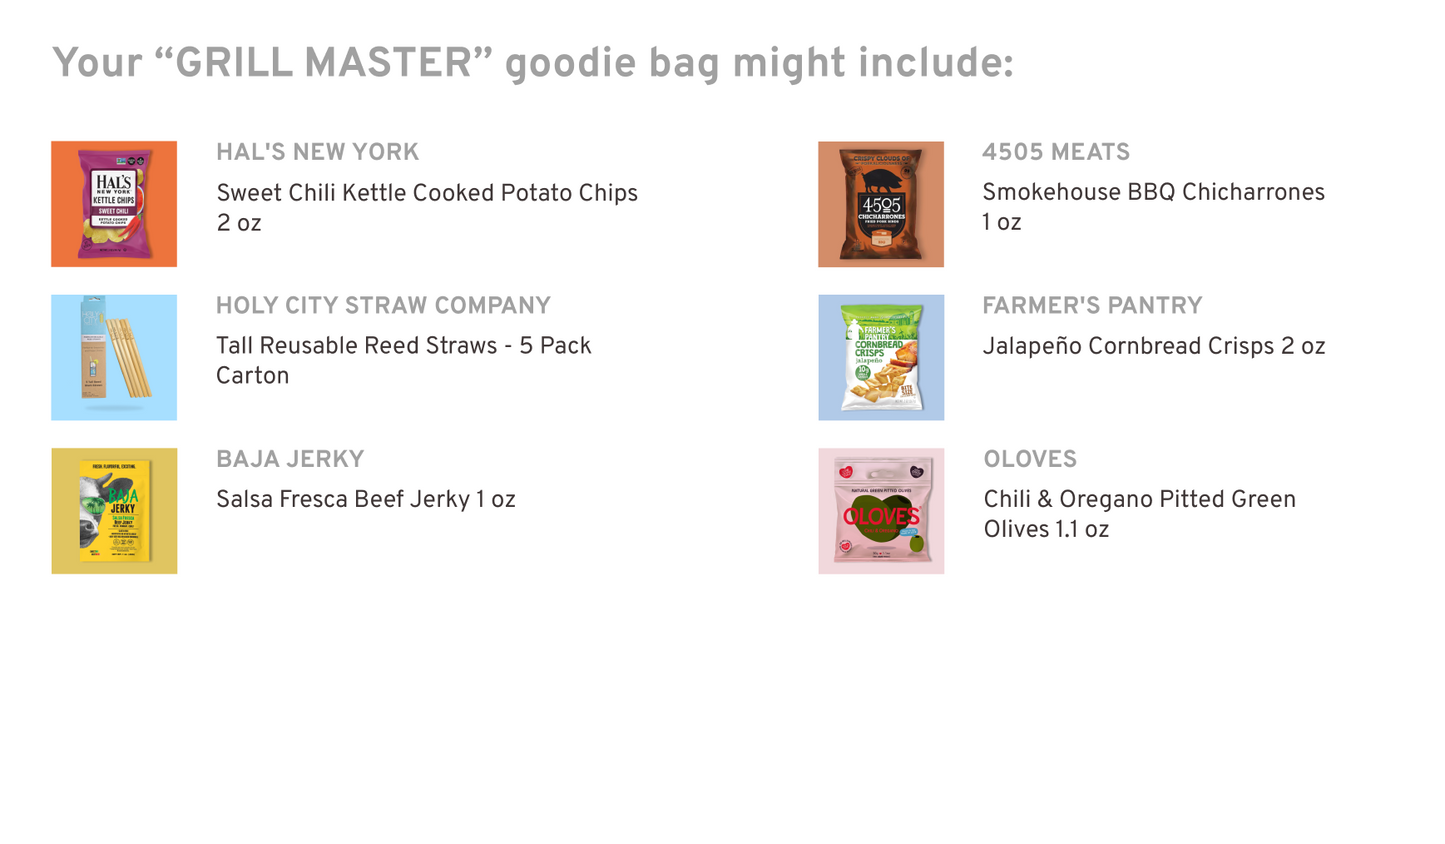 Grill Master Goodie Bag